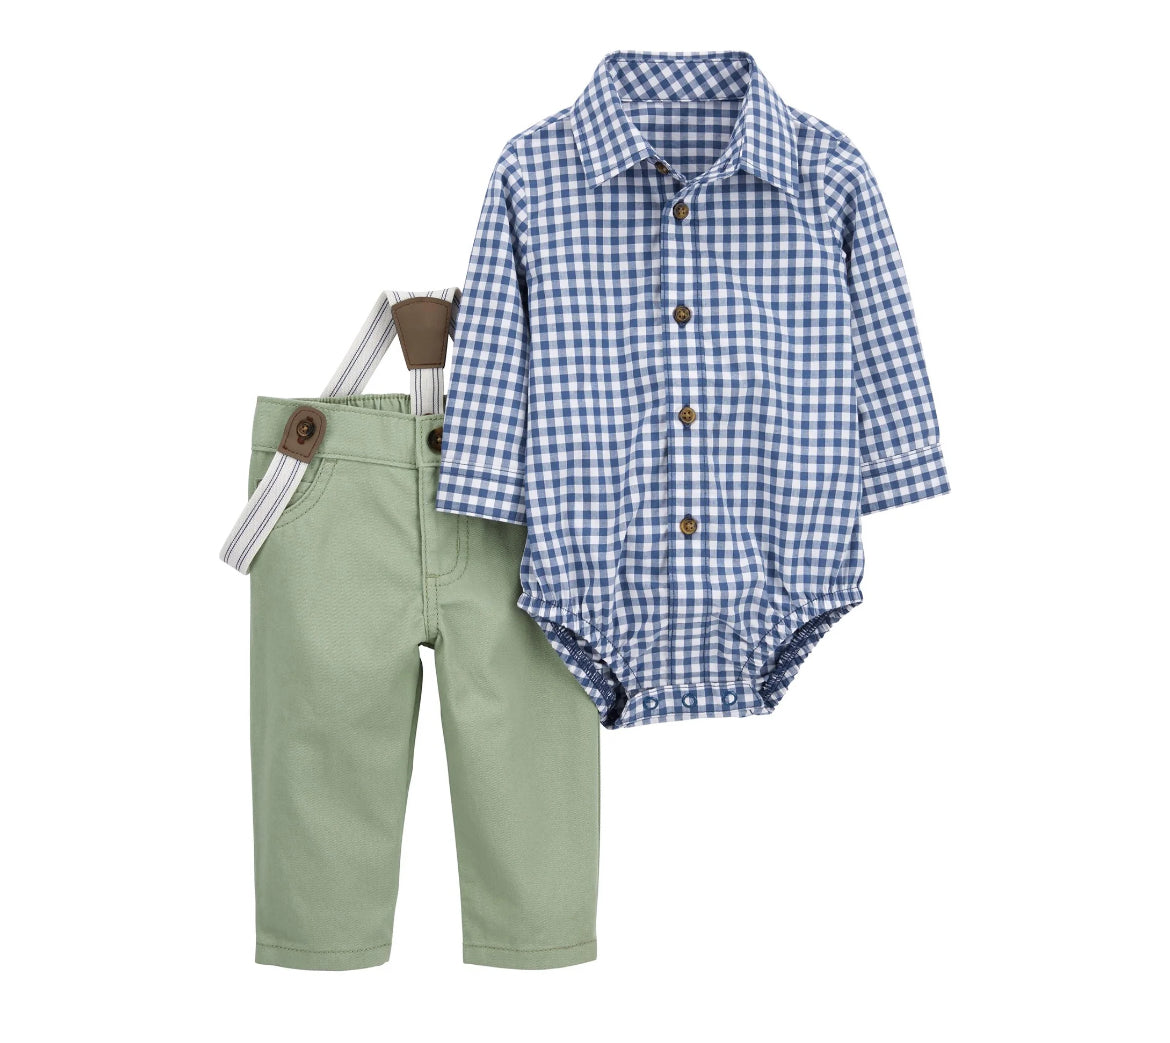 Carter's Child of Mine Baby Boy 2-Piece Bodysuit and Pant Outfit Set